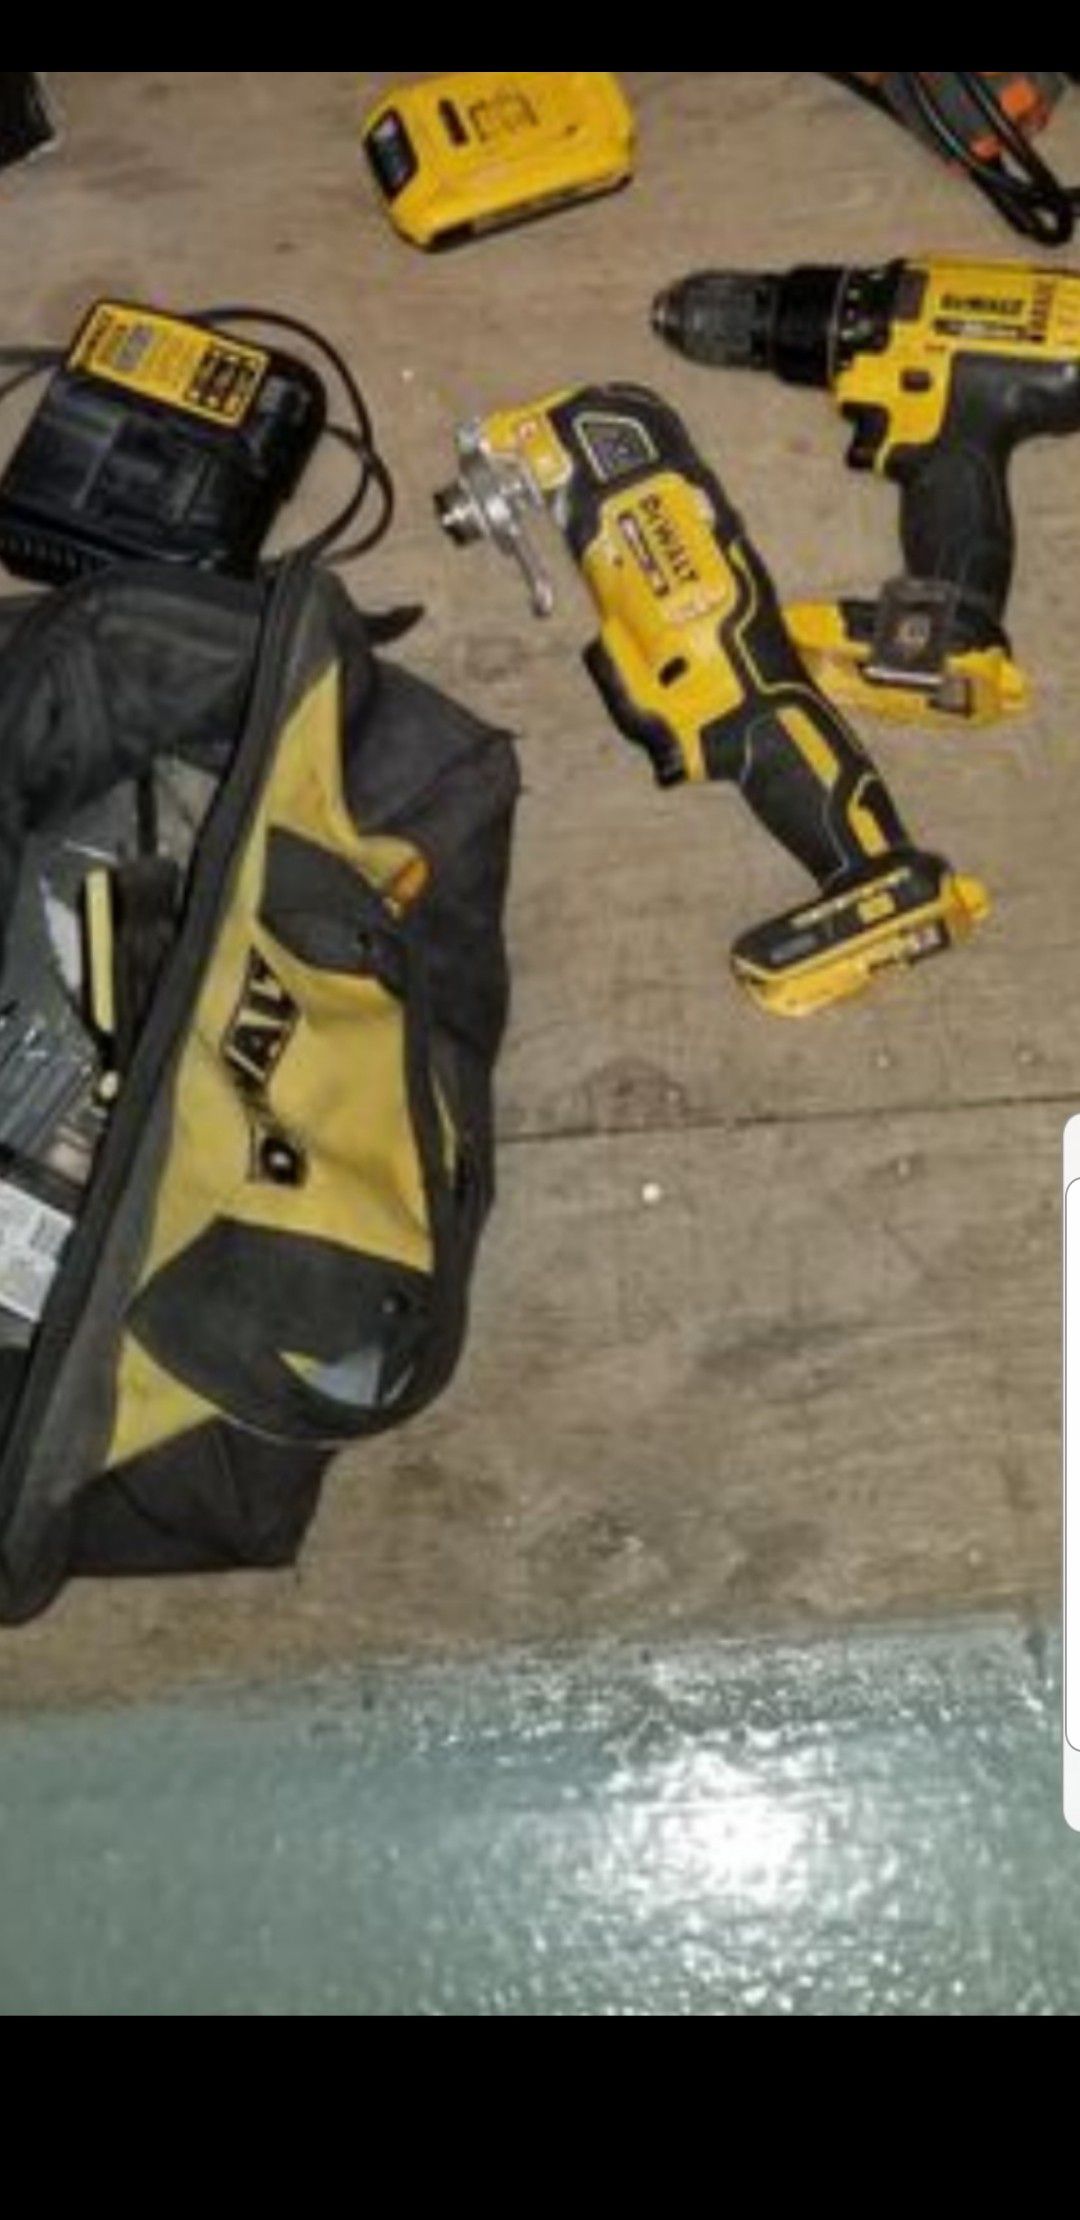 Dewalt power tools with battery and charger and bag